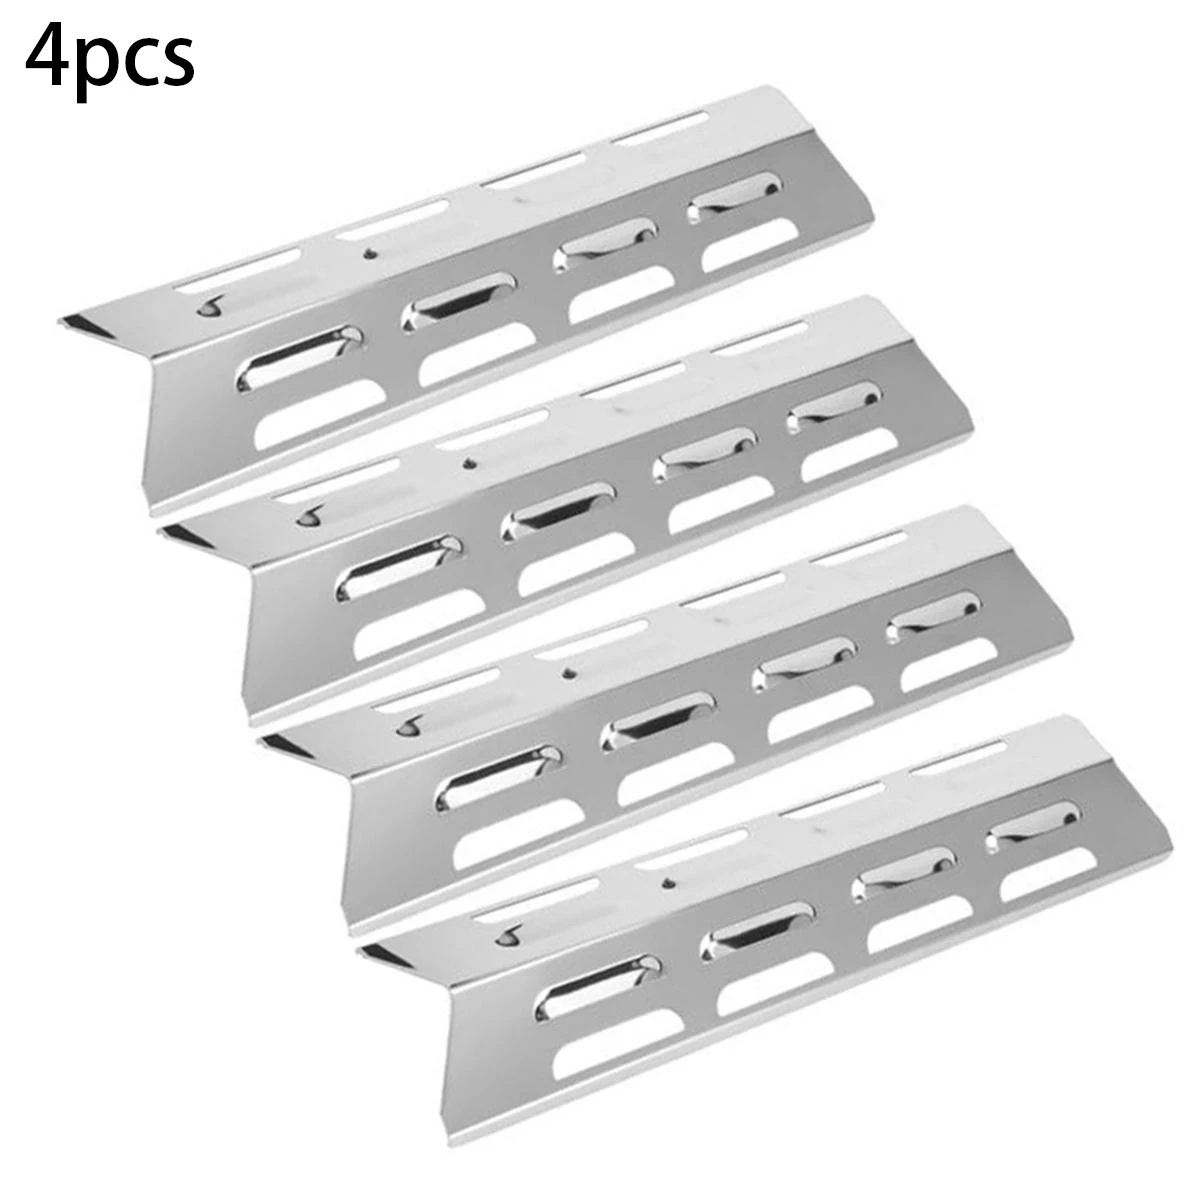 

4Pcs Heat Plate Adjustable Stainless Steel BBQ Gas Grill Replacement Kit 408x98x35mm No Odor Safe BBQ Tool Accessories Kitchen